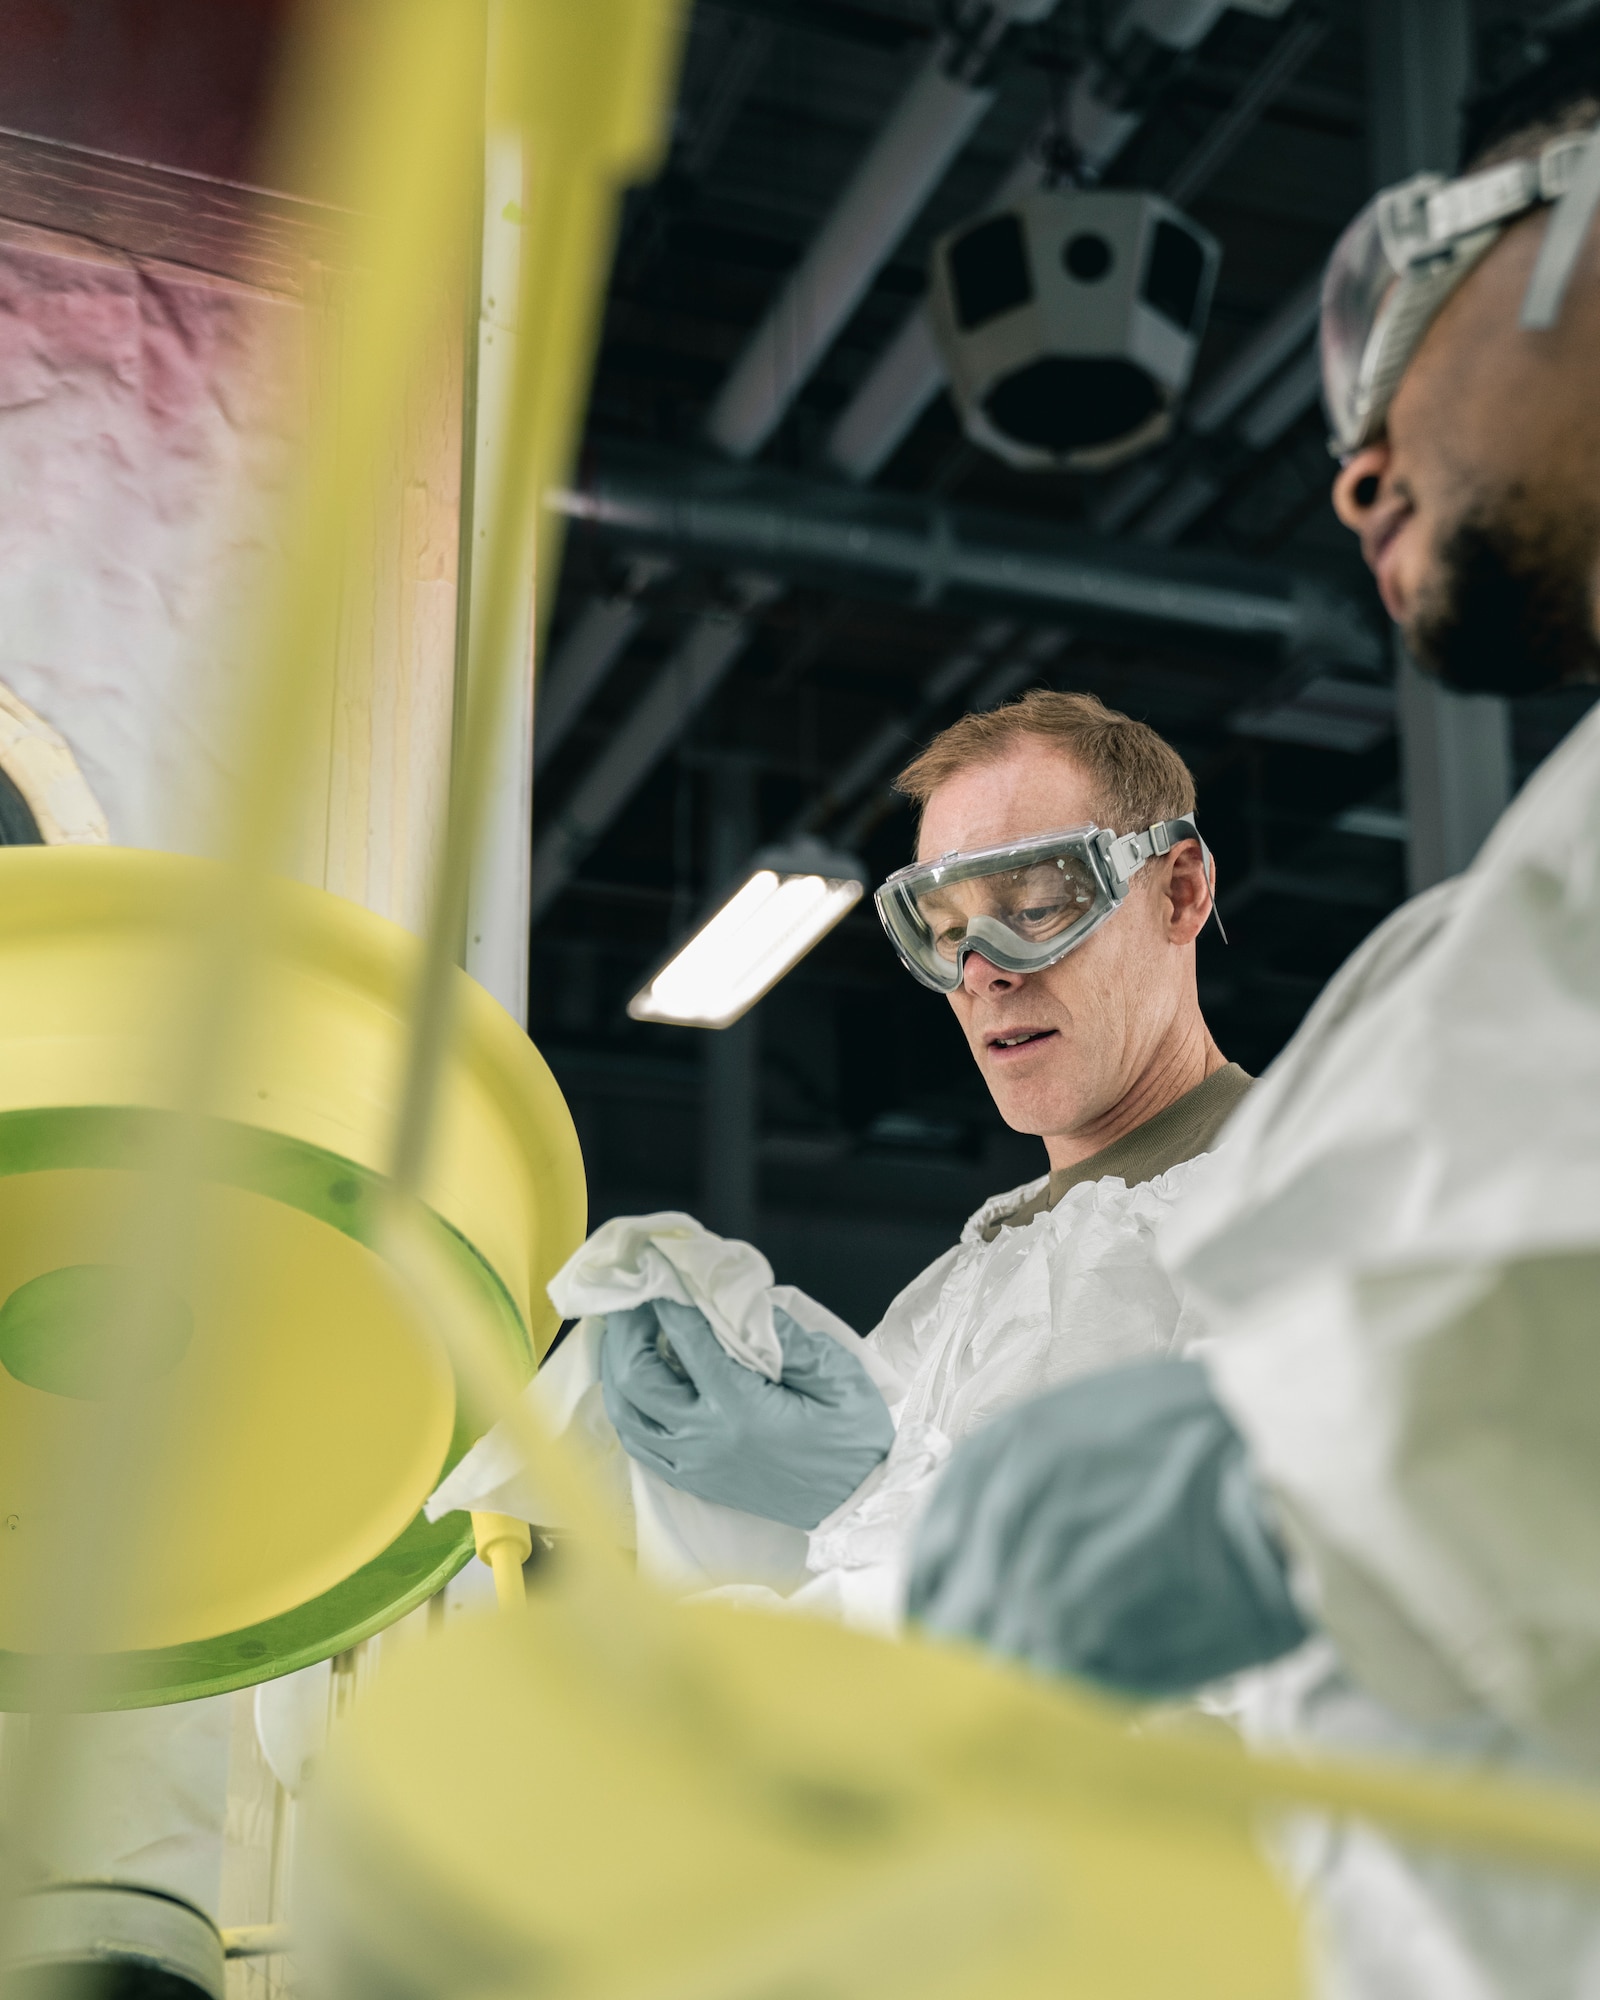 U.S. Air Force Col. Benjamin Jonsson, left, 6th Air Refueling Wing commander, and U.S. Air Force Senior Airman Bryce Johnson, 6th Maintenance Squadron aircraft structural maintenance apprentice, prepare to paint an aircraft part in the corrosion control facility at MacDill Air Force Base, Florida, April 28, 2022.